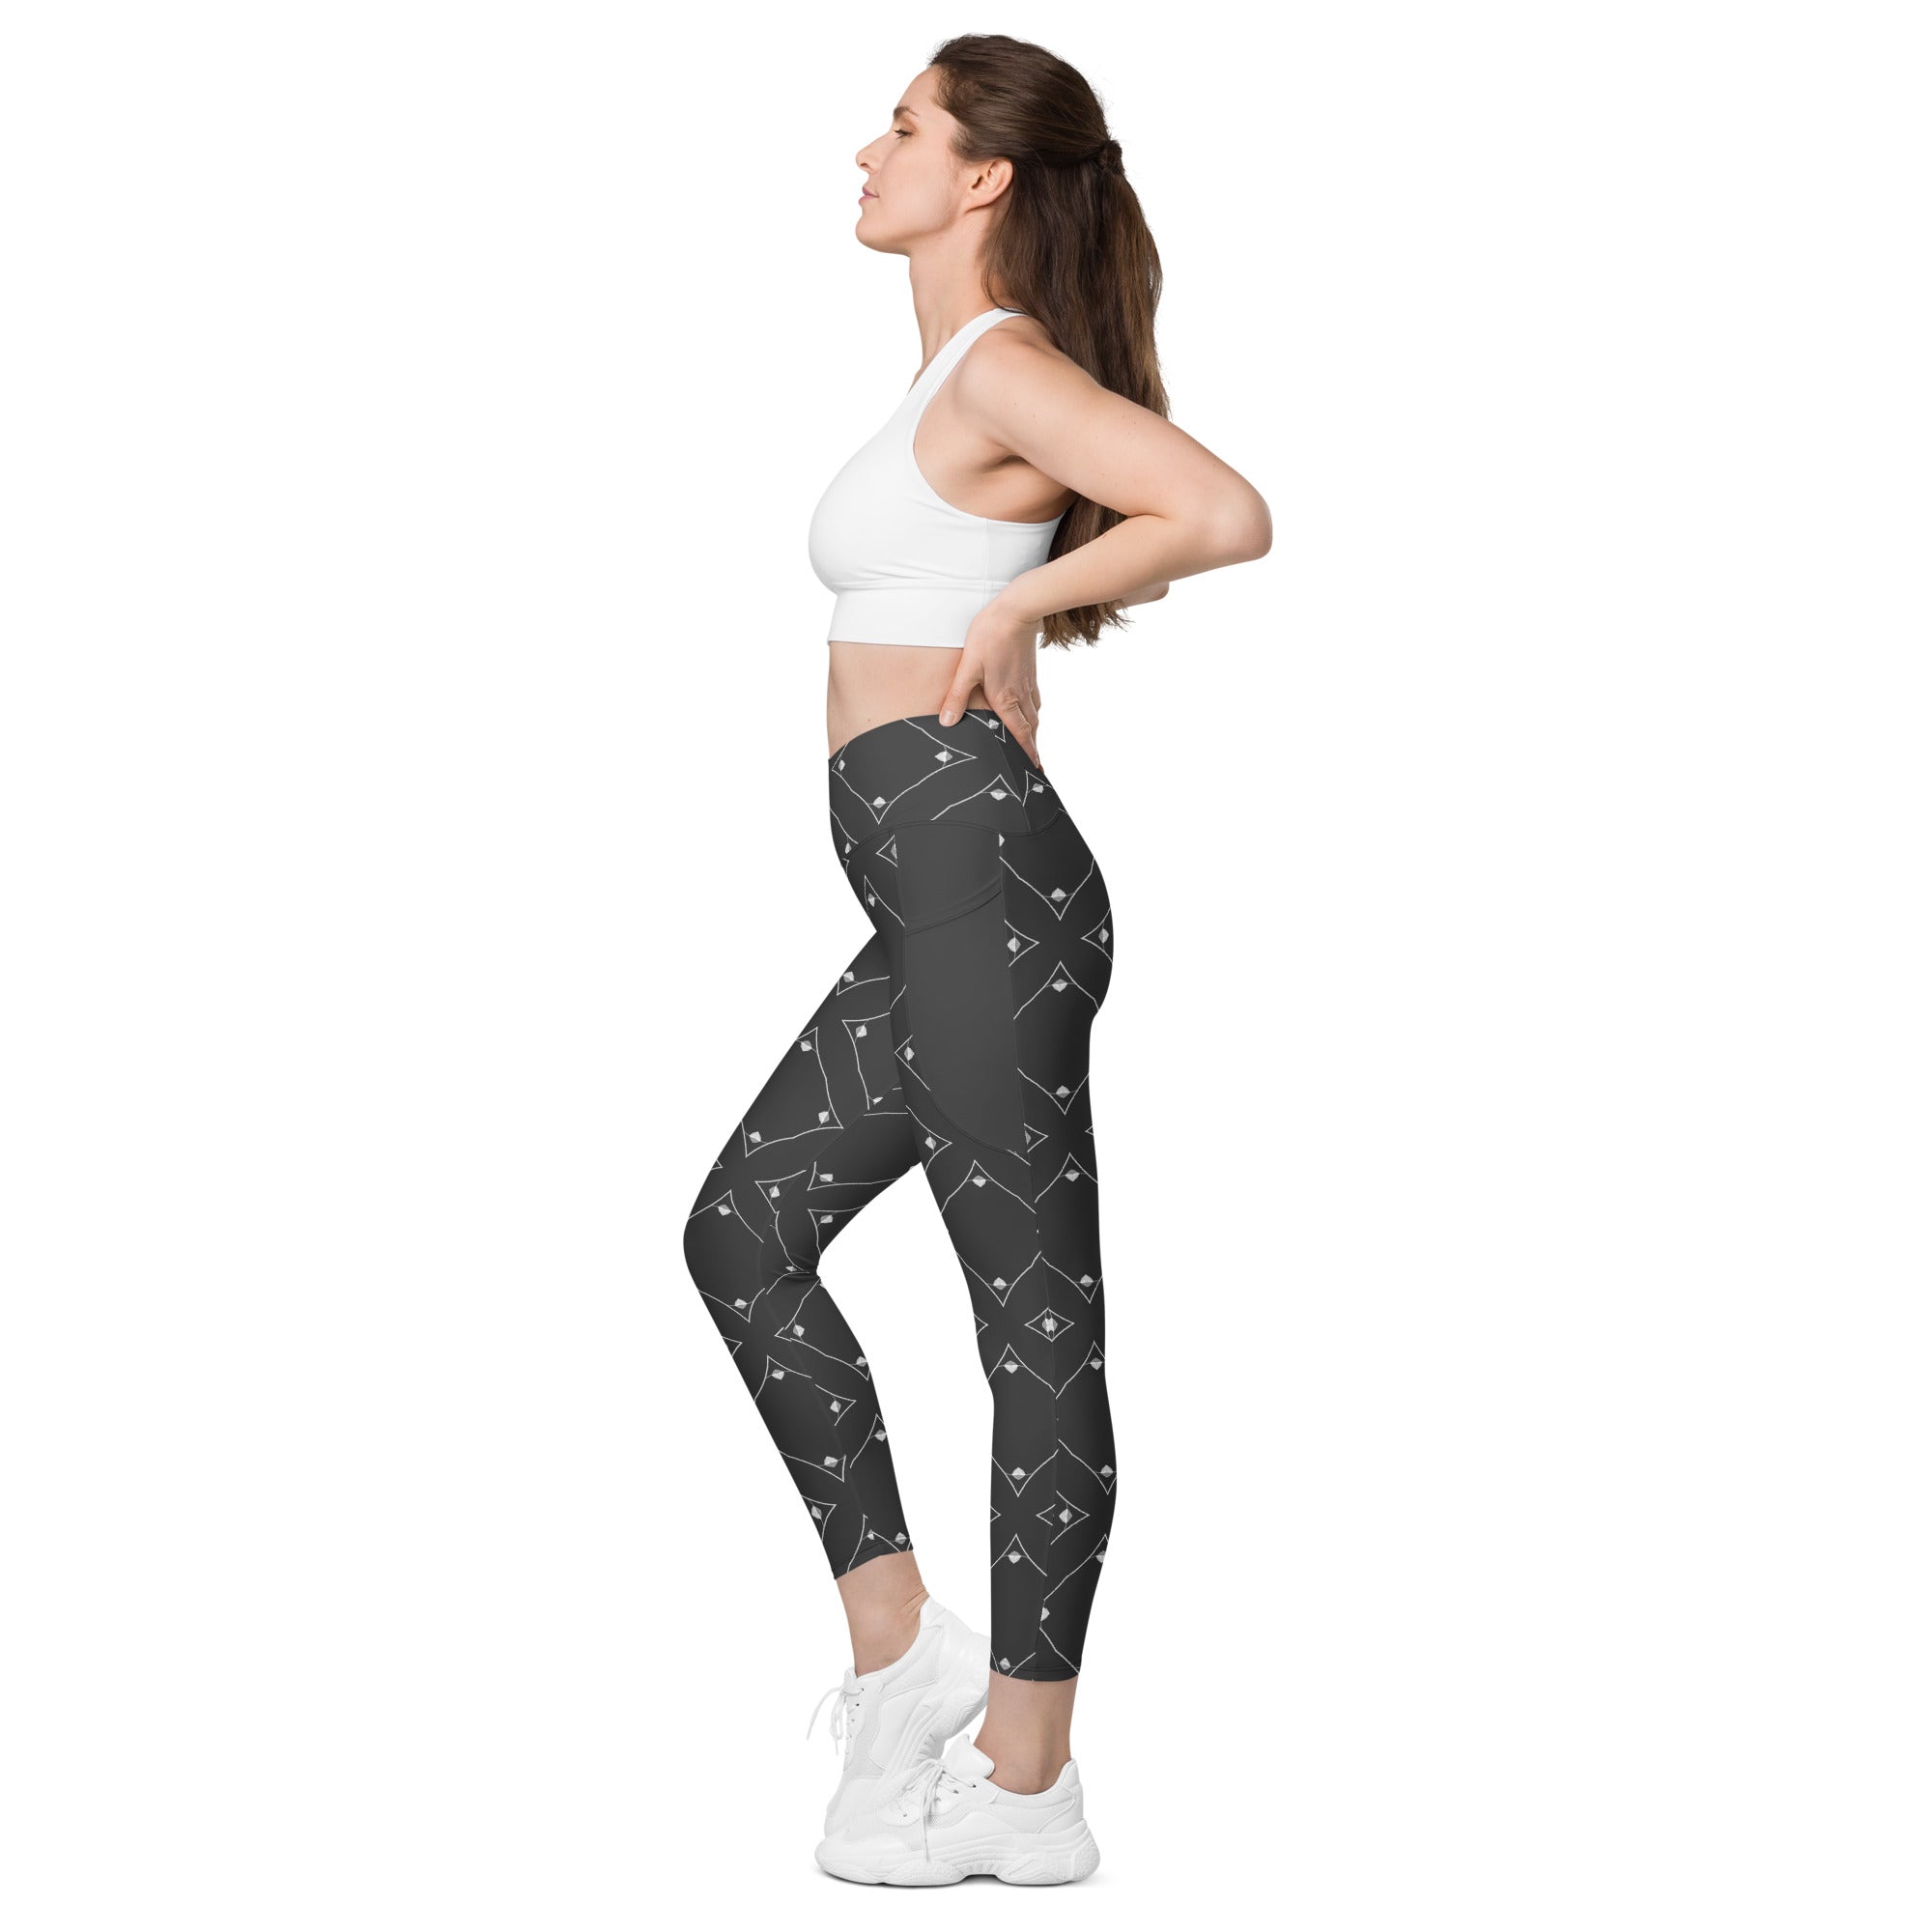 Comfortable tie-dye temptation leggings perfect for yoga and fitness